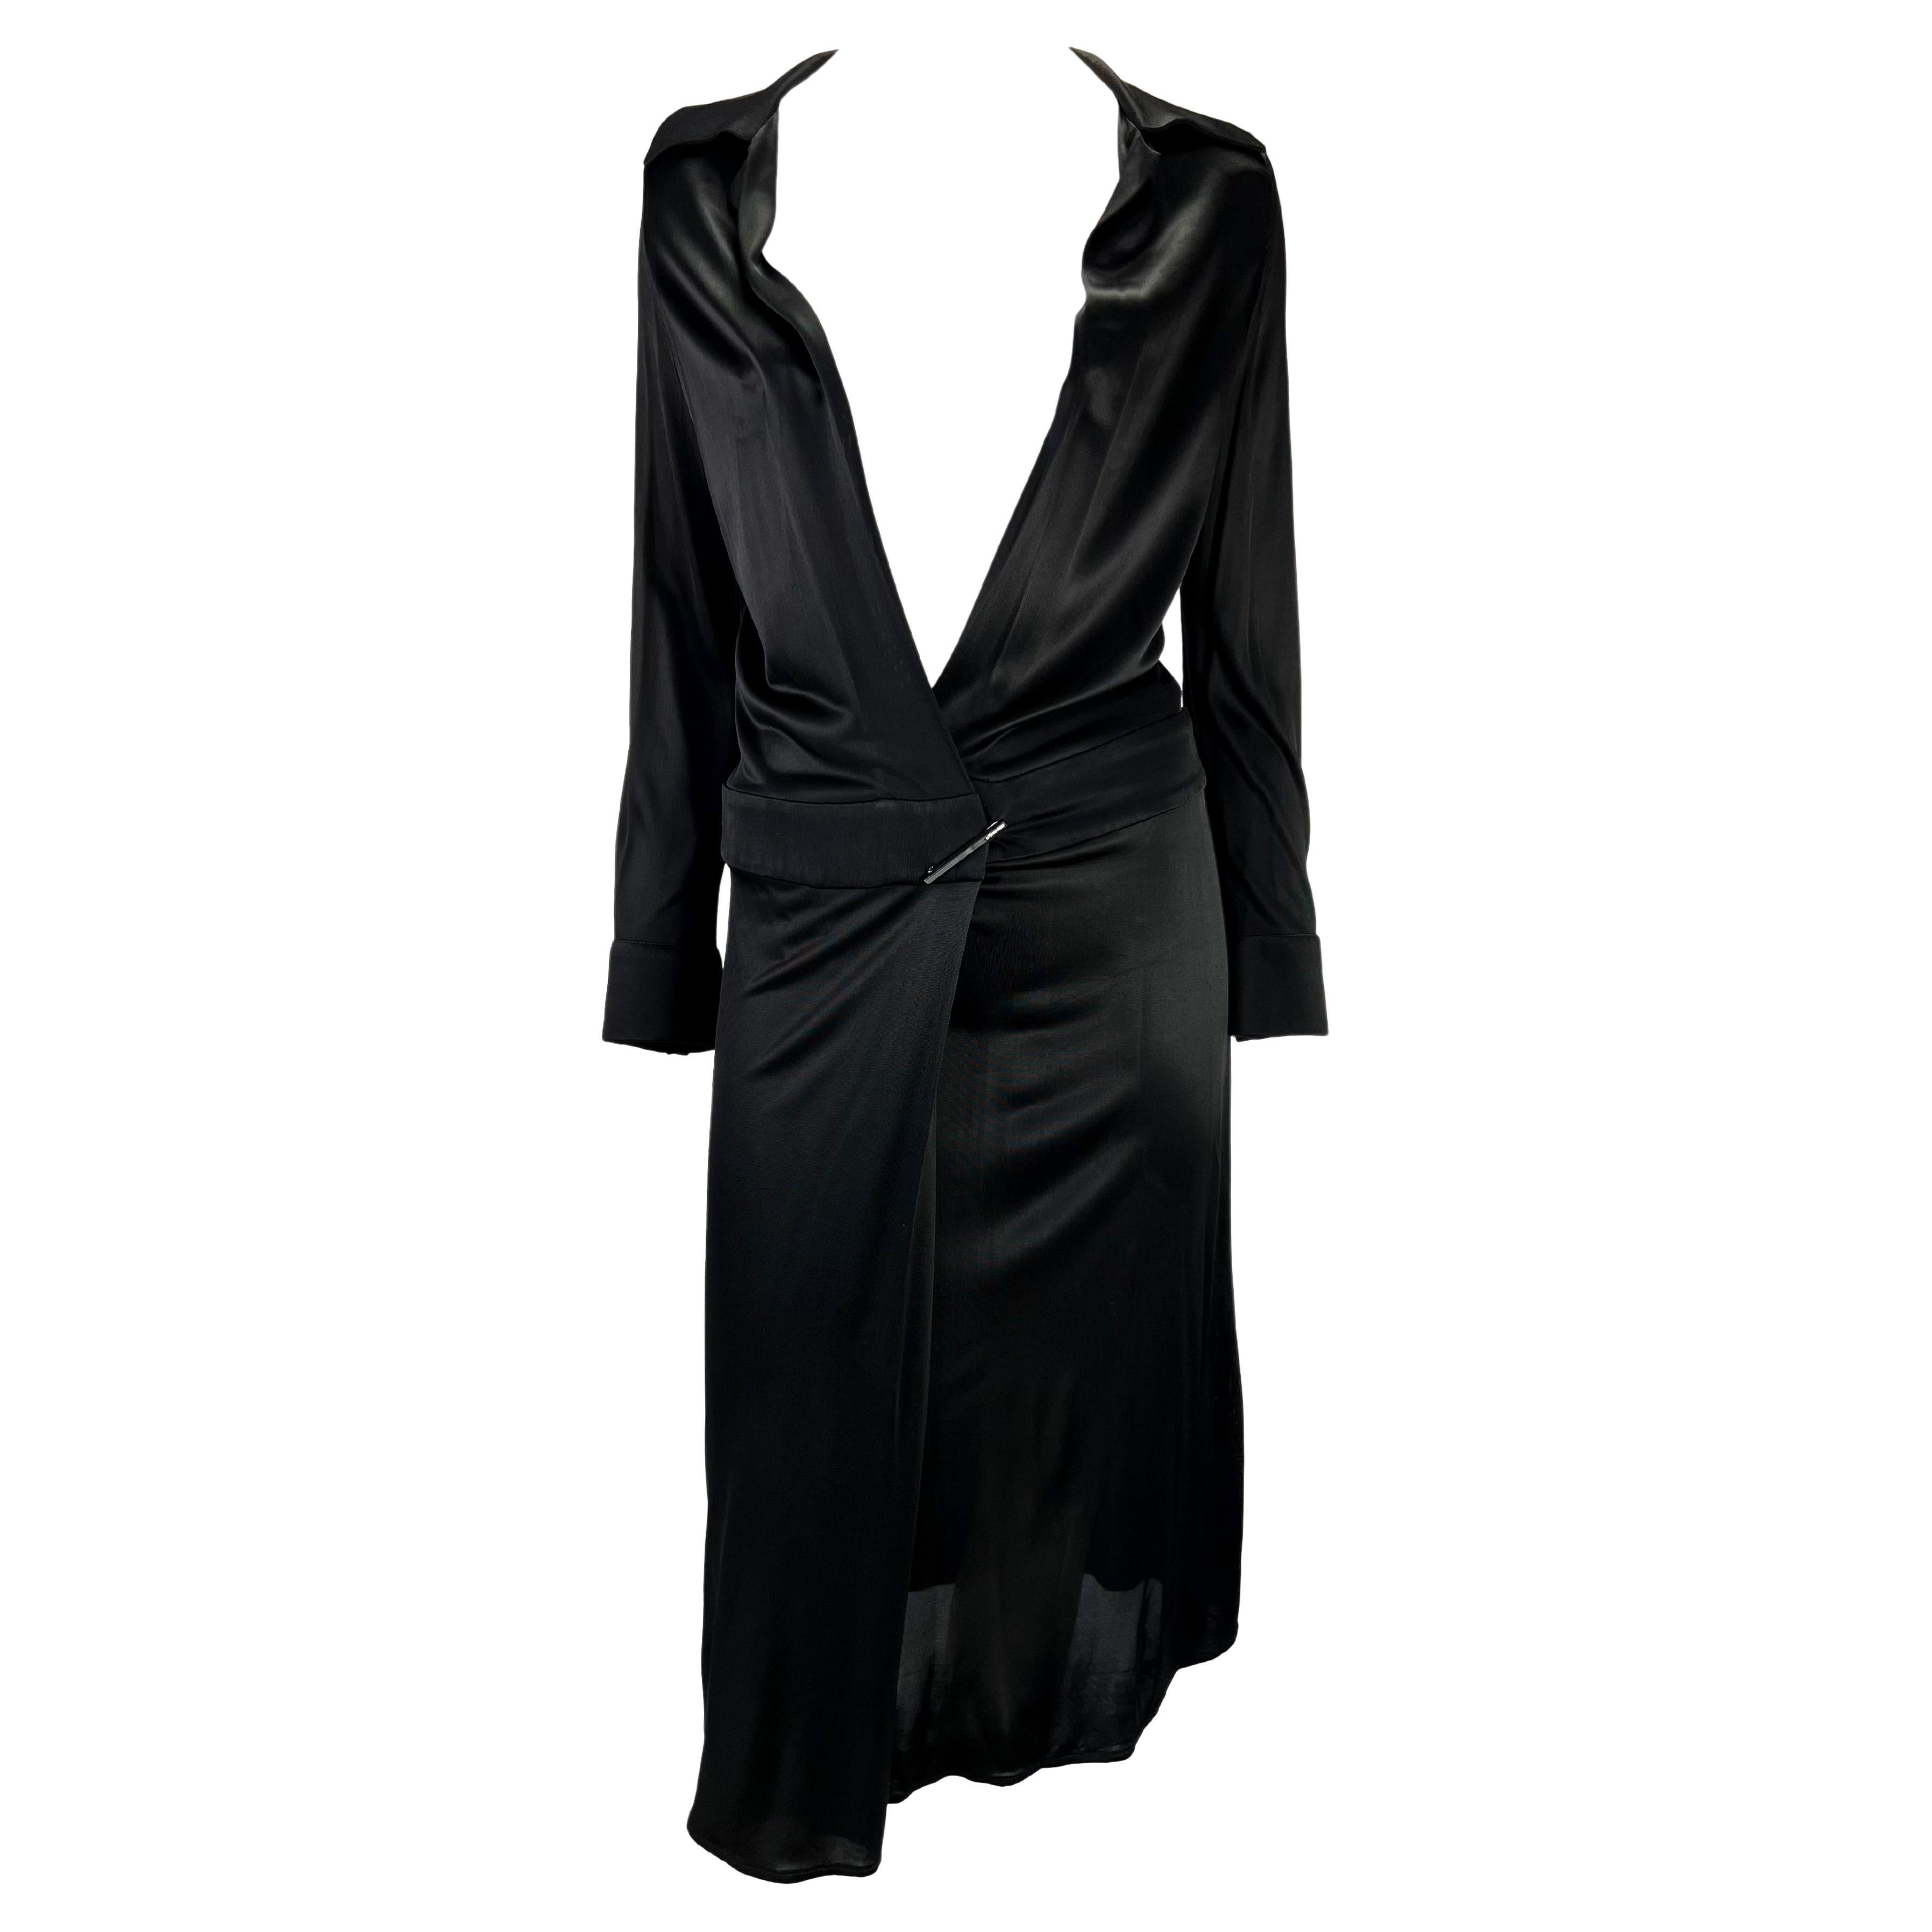 S/S 2000 Gucci by Tom Ford Runway Plunging Neckline Black Viscose Runway Dress